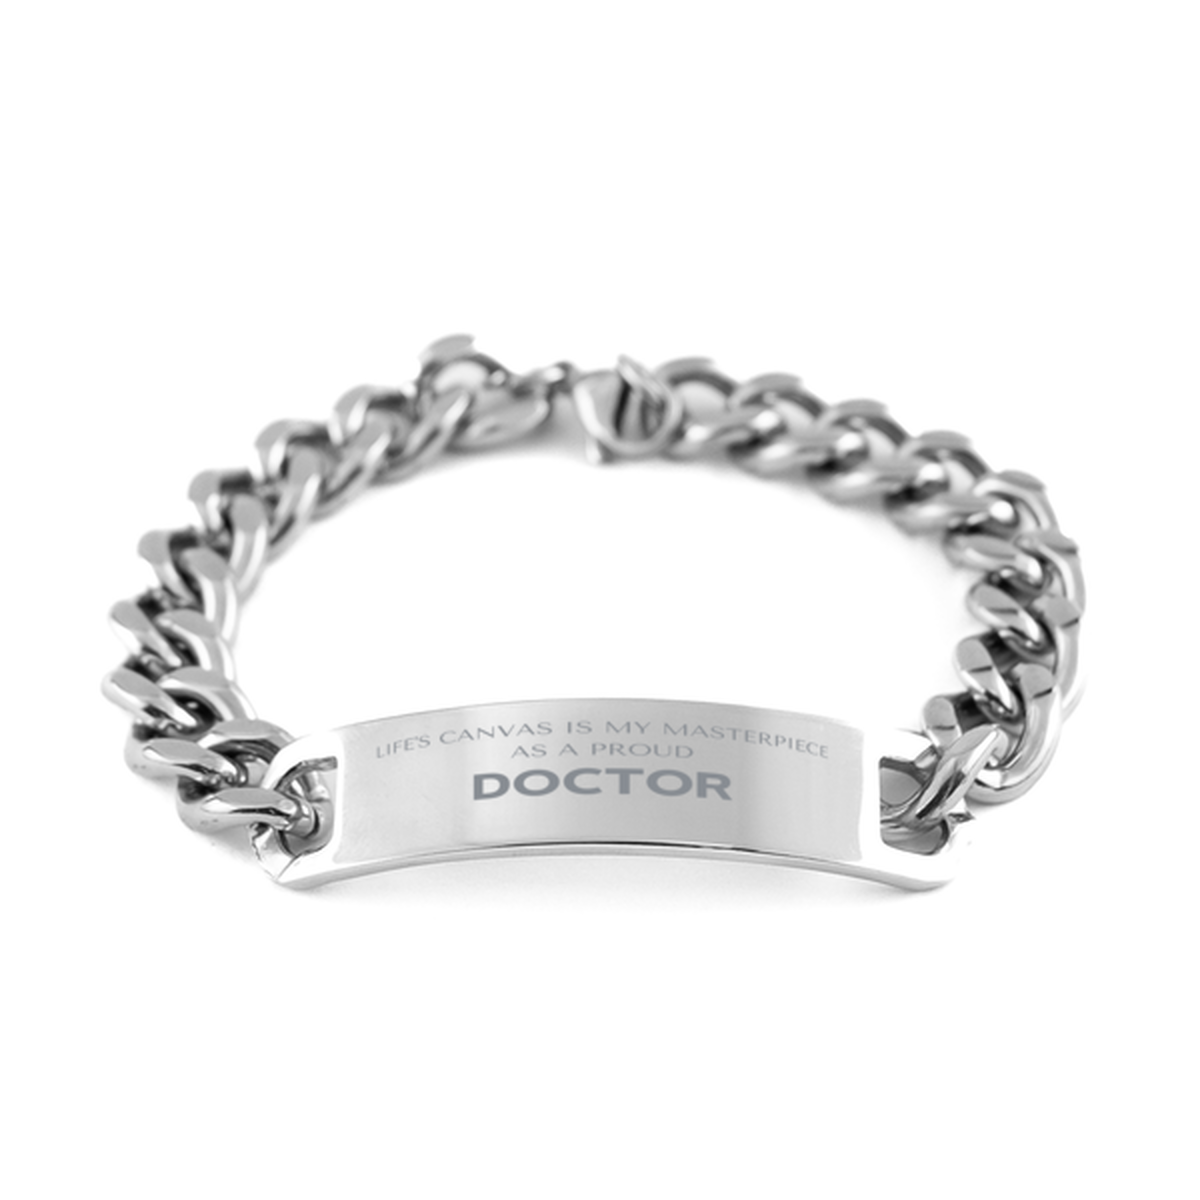 Proud Doctor Gifts, Life's canvas is my masterpiece, Epic Birthday Christmas Unique Cuban Chain Stainless Steel Bracelet For Doctor, Coworkers, Men, Women, Friends